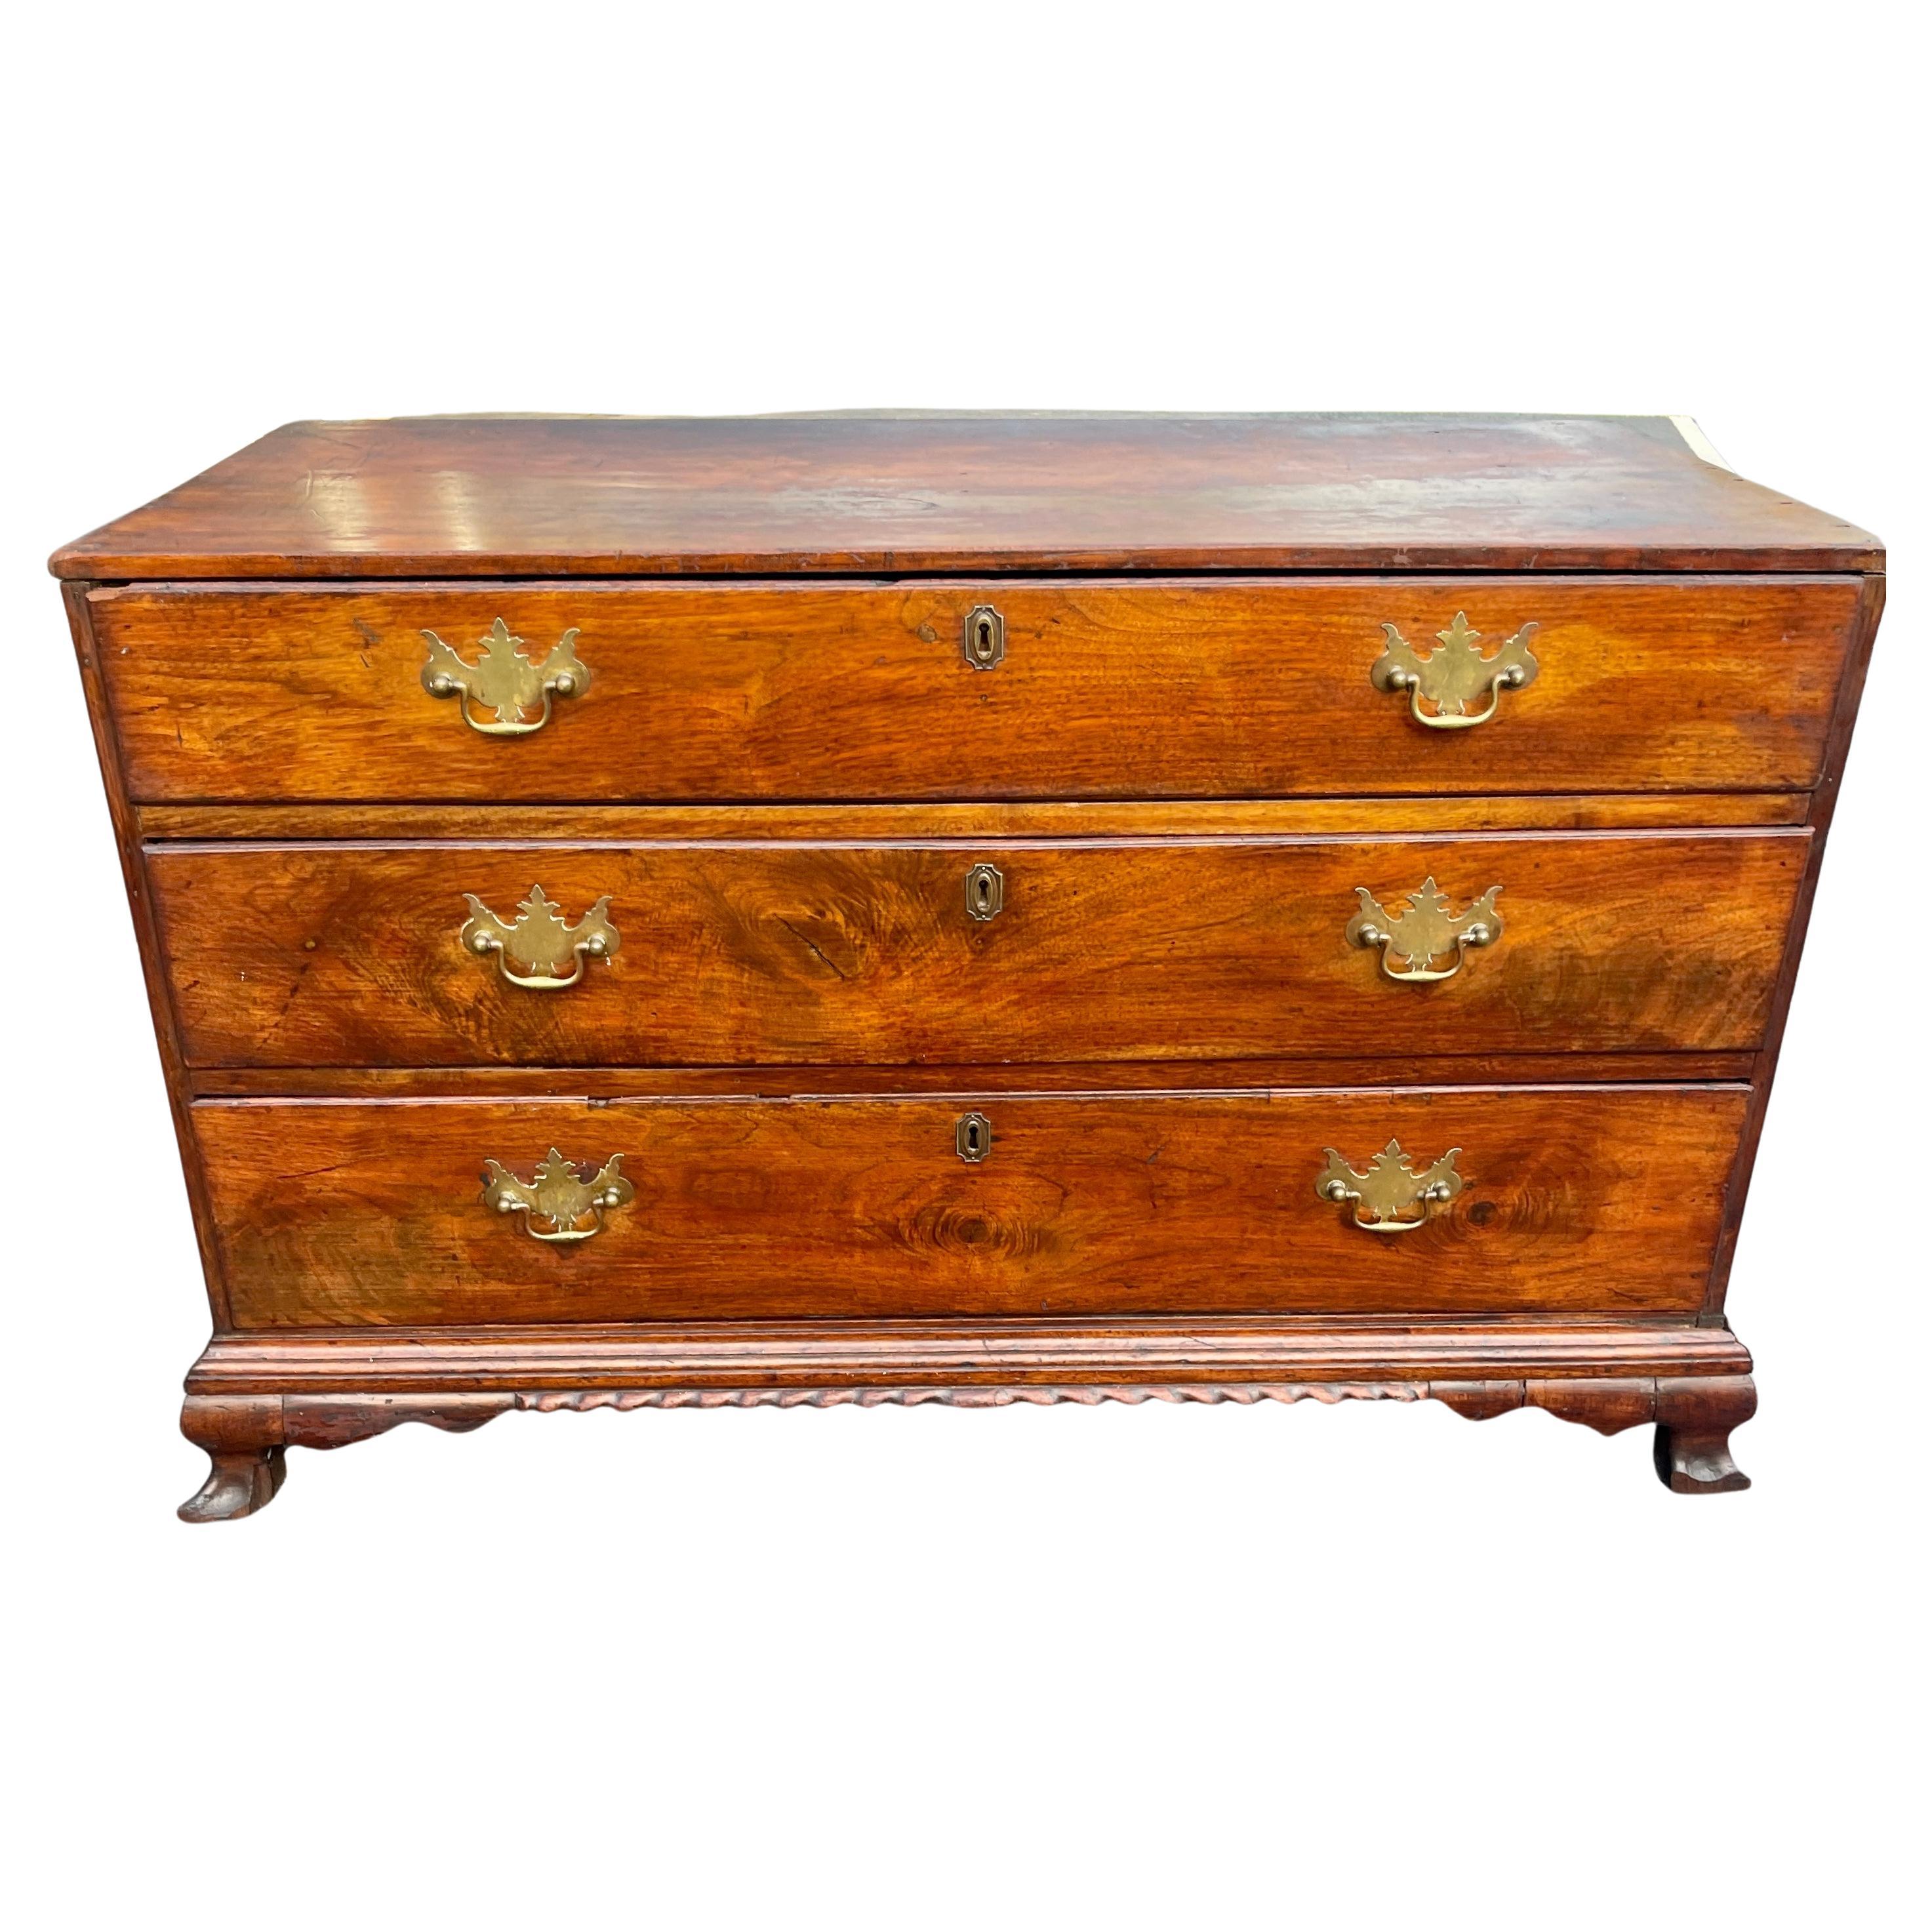 American Federal chest of drawers. This charming three drawer chest has original brass hardware. The beautiful antique low dresser or chest is in wonderful original vintage condition. The brass keyhole hardware is of later date. The three drawer